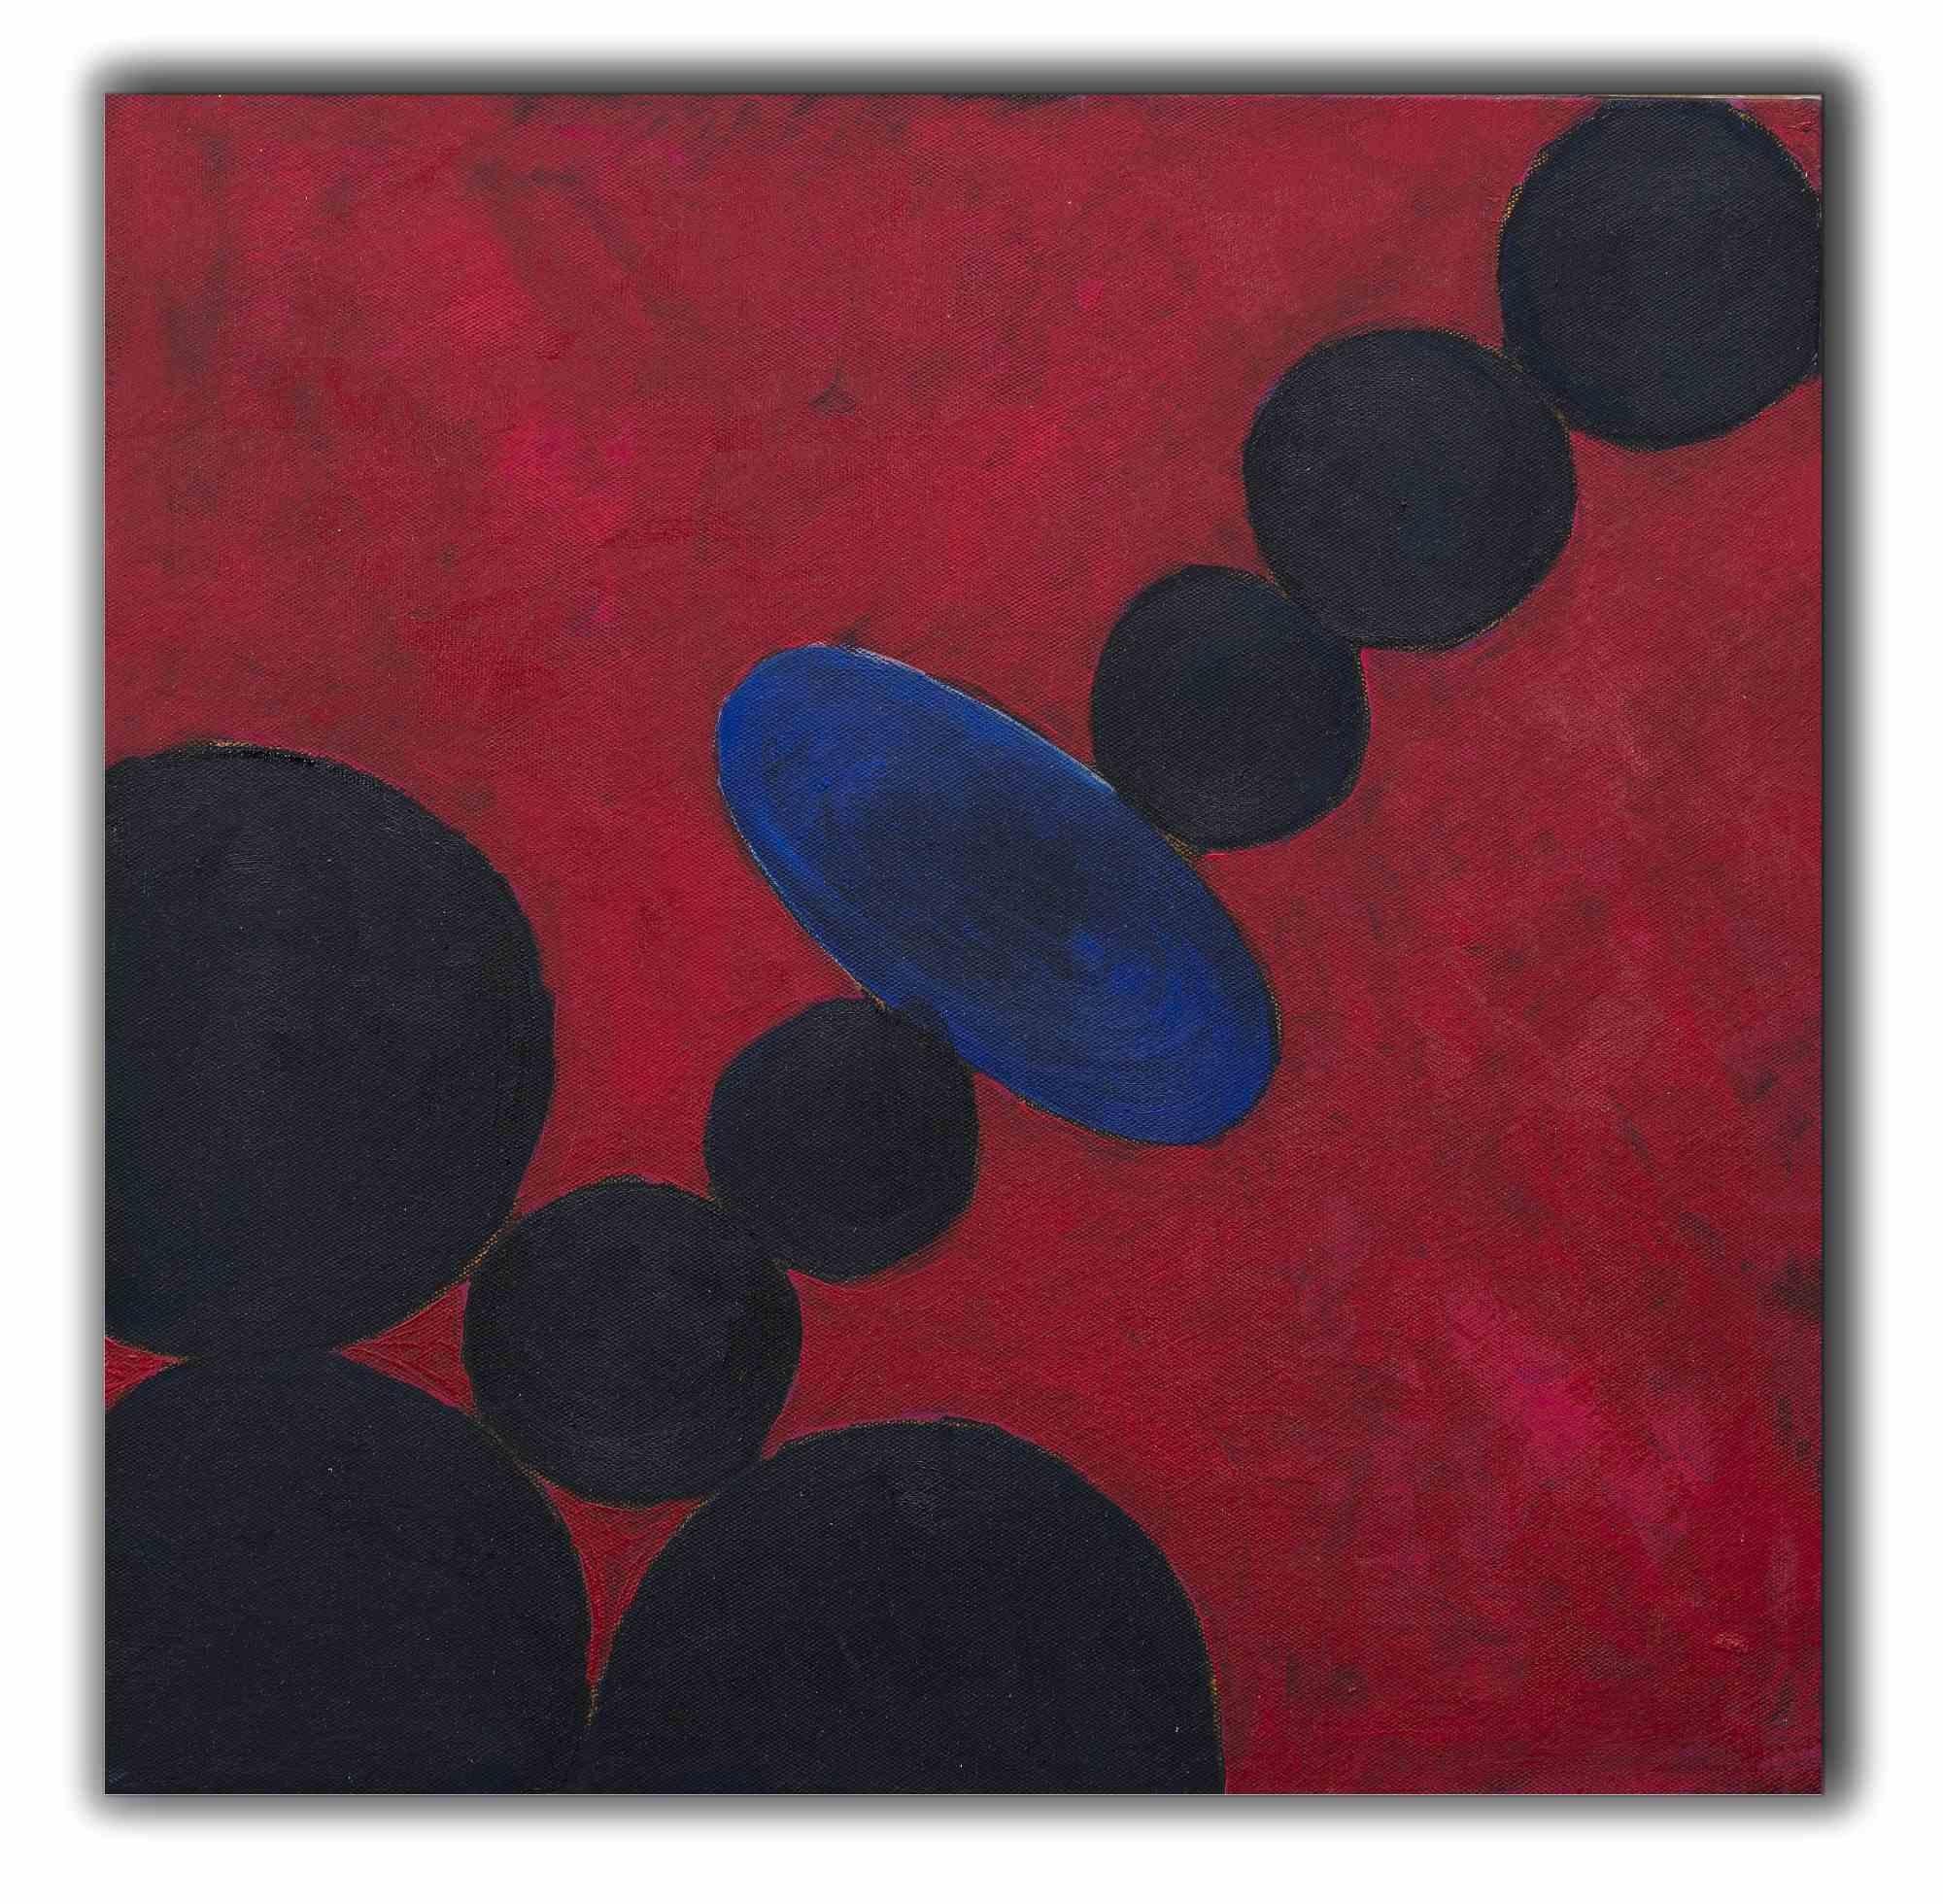 Red Composition with Circles is an original artwork realized by Giorgio Lo Fermo (b. 1947) in 2020.

Original Oil Painting on Canvas.

Hand-signed, titled and dated on the back of the canvas.

Mint conditions.

Giorgio Lo Fermo (b. 1947) in 2020.